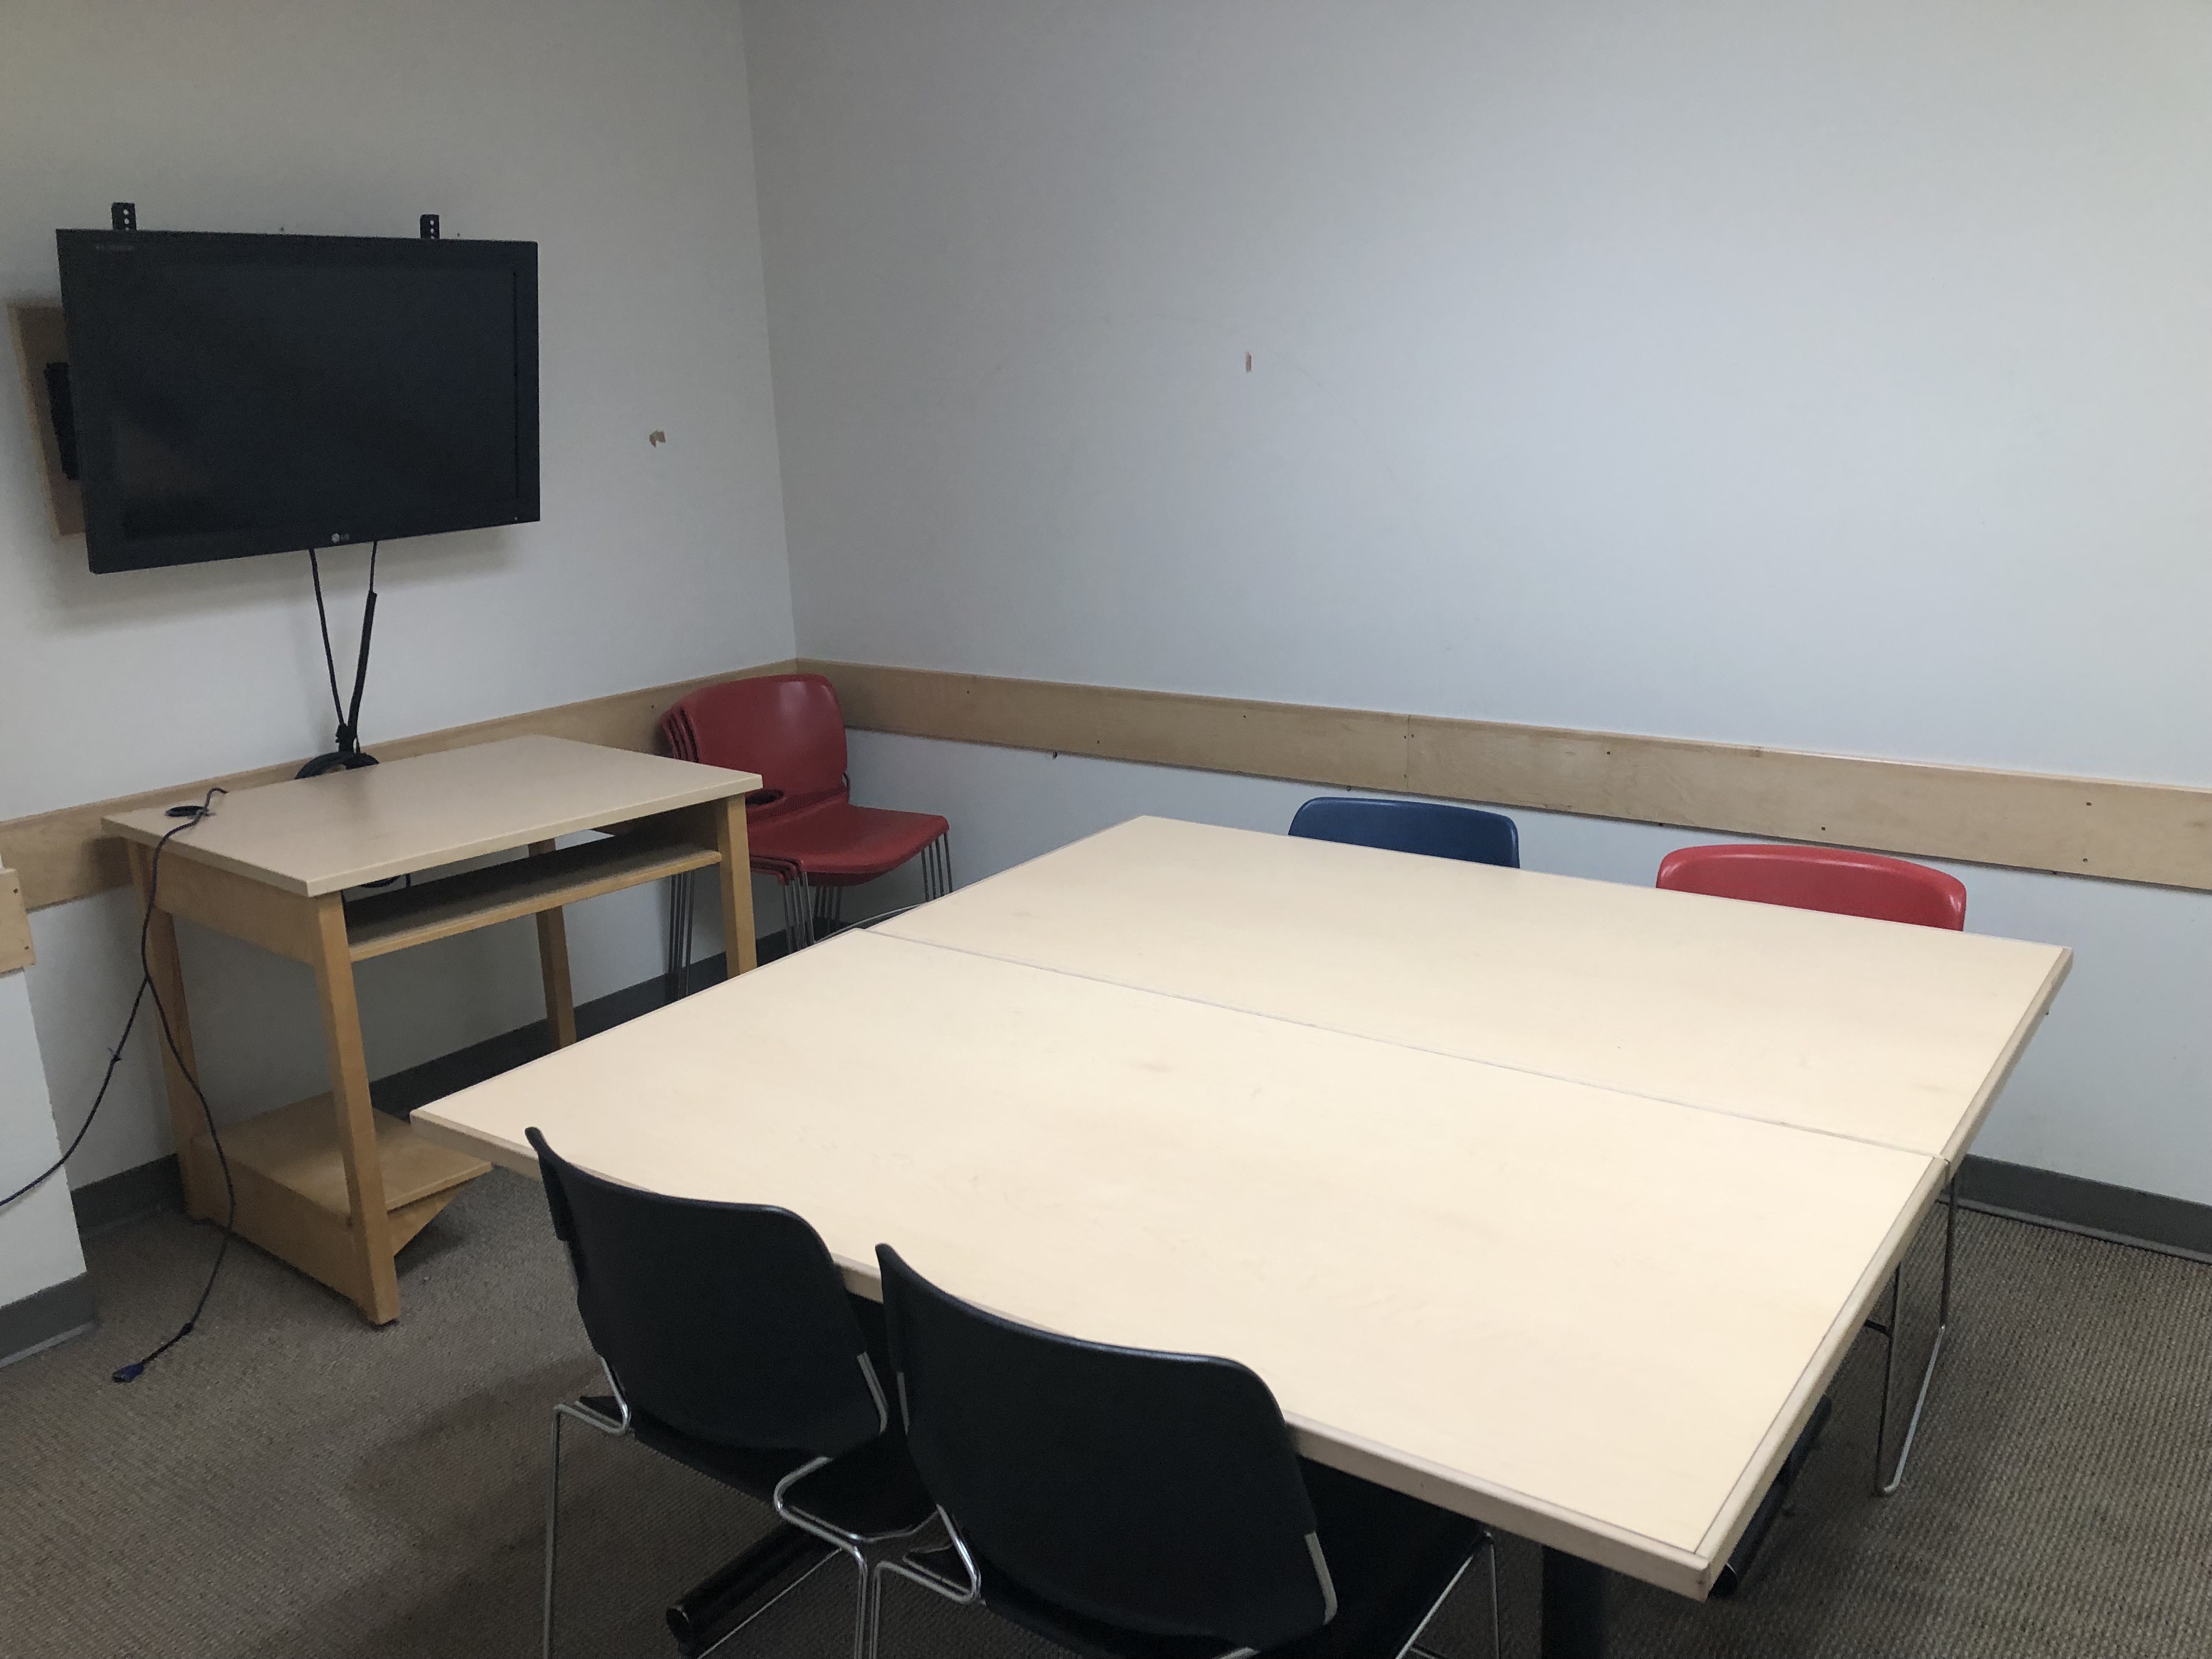 Photo of group study room. Rooms described below.  The image shows two tables put together to create a square. Four chairs at desk and four chairs stacked in corner. 